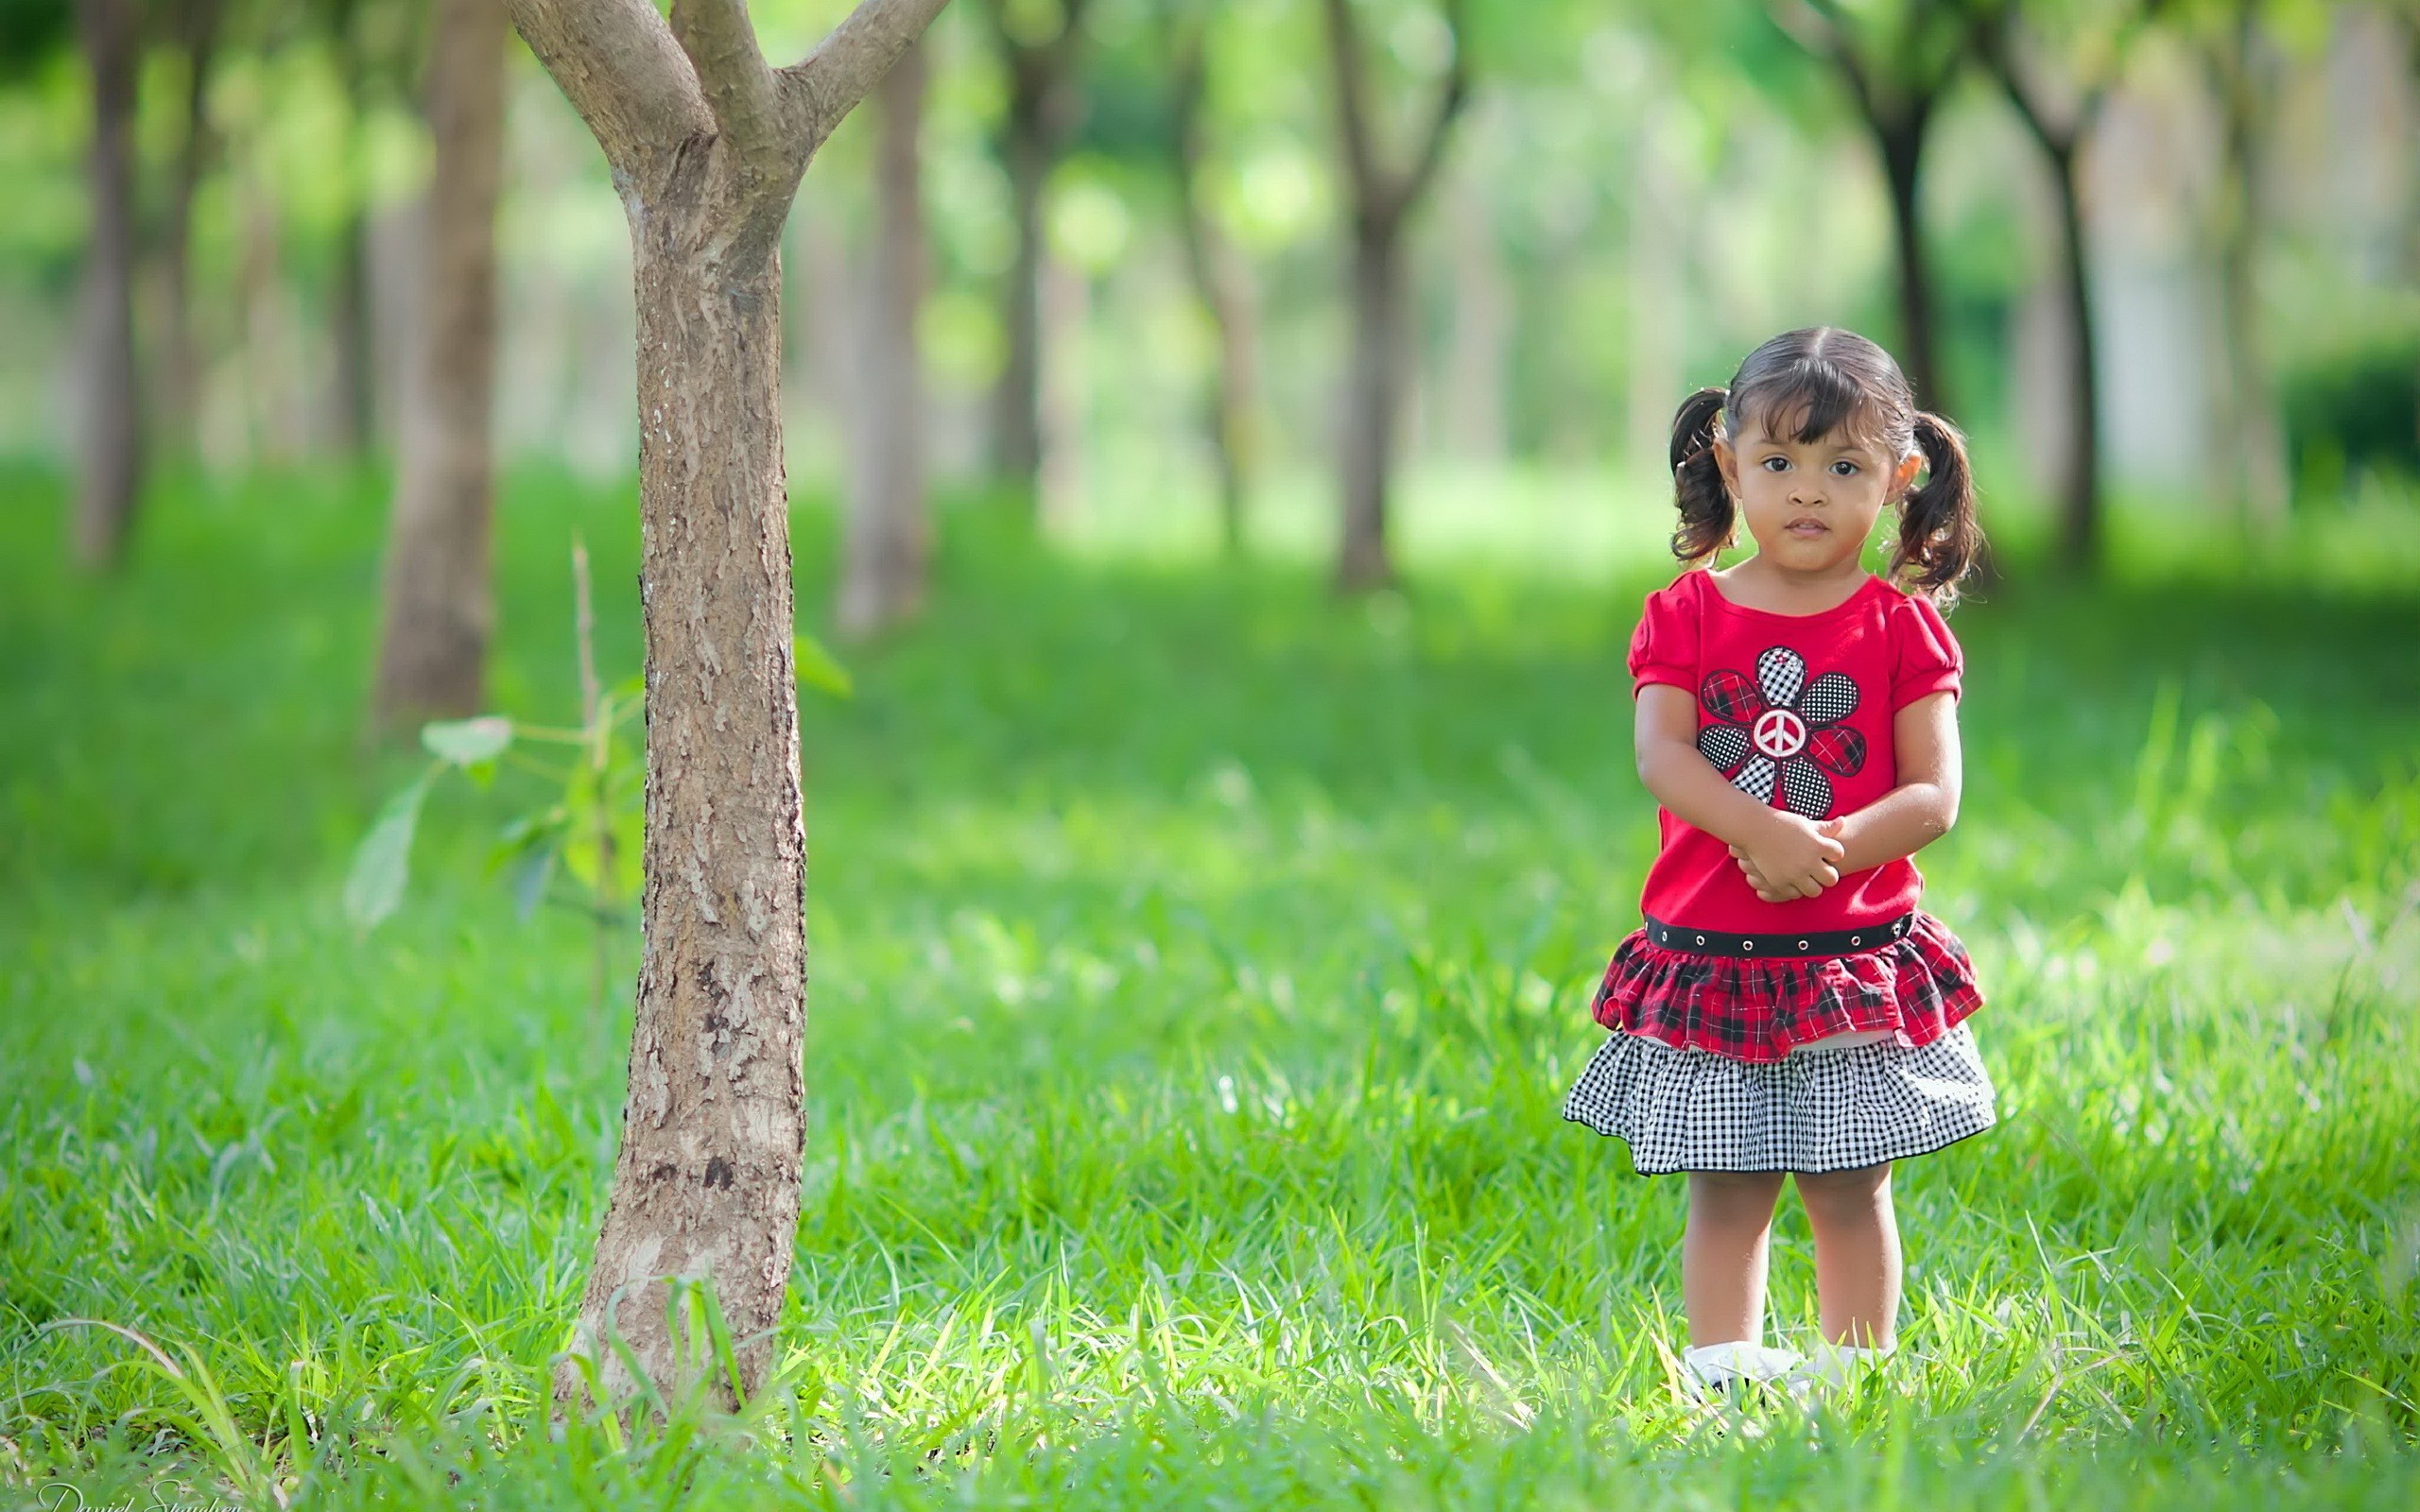 Collection of Baby Girl Wallpapers Free Download on HDWallpapers